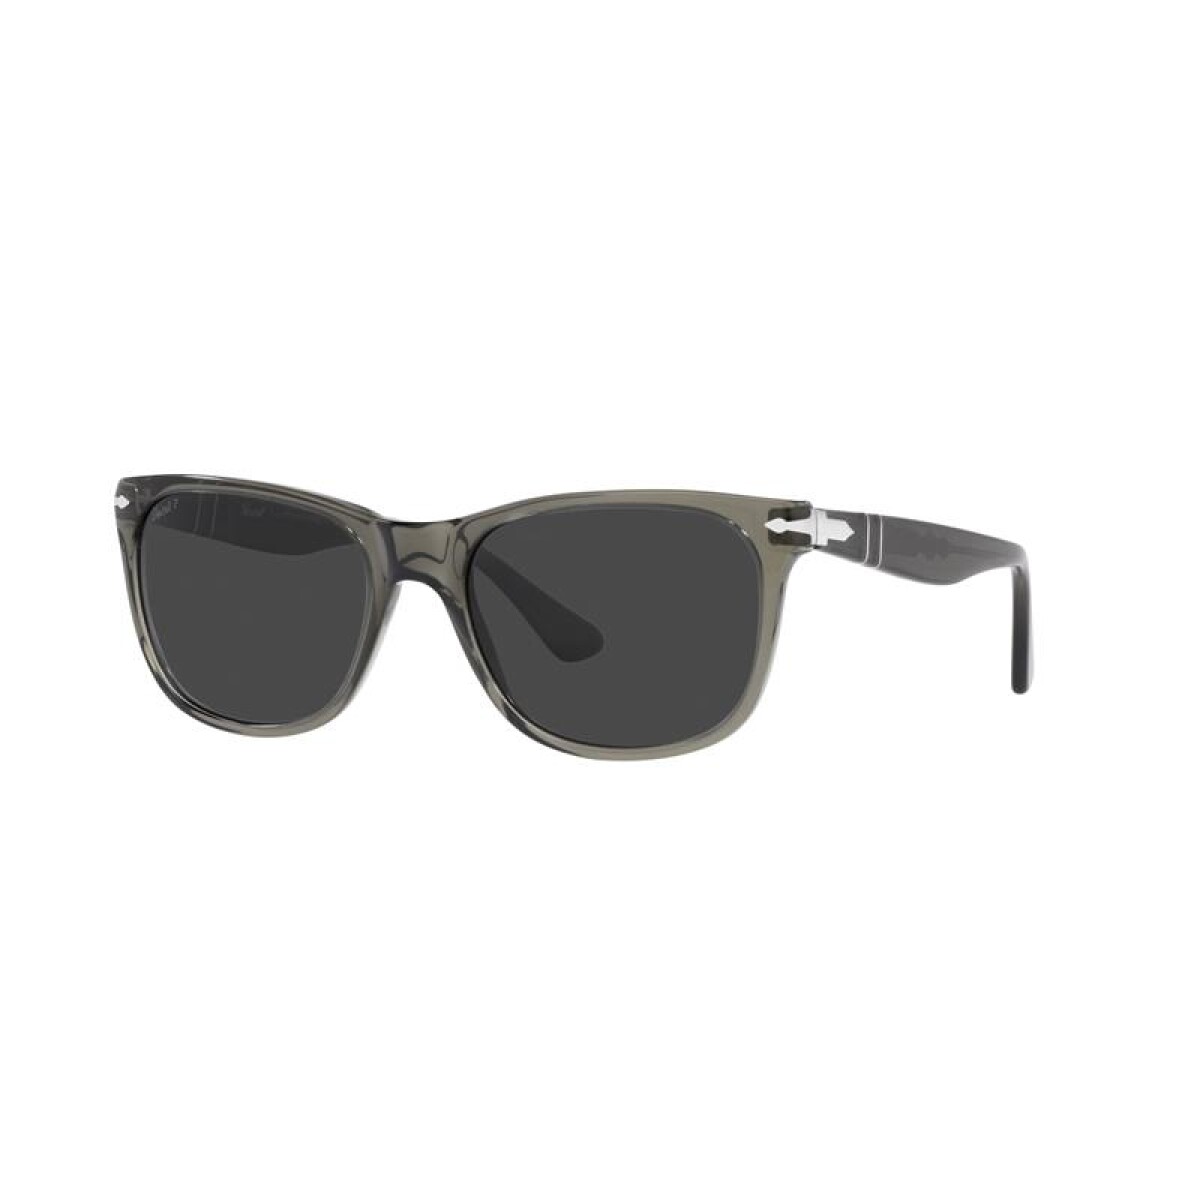 Persol 3291-s - 1103/48 